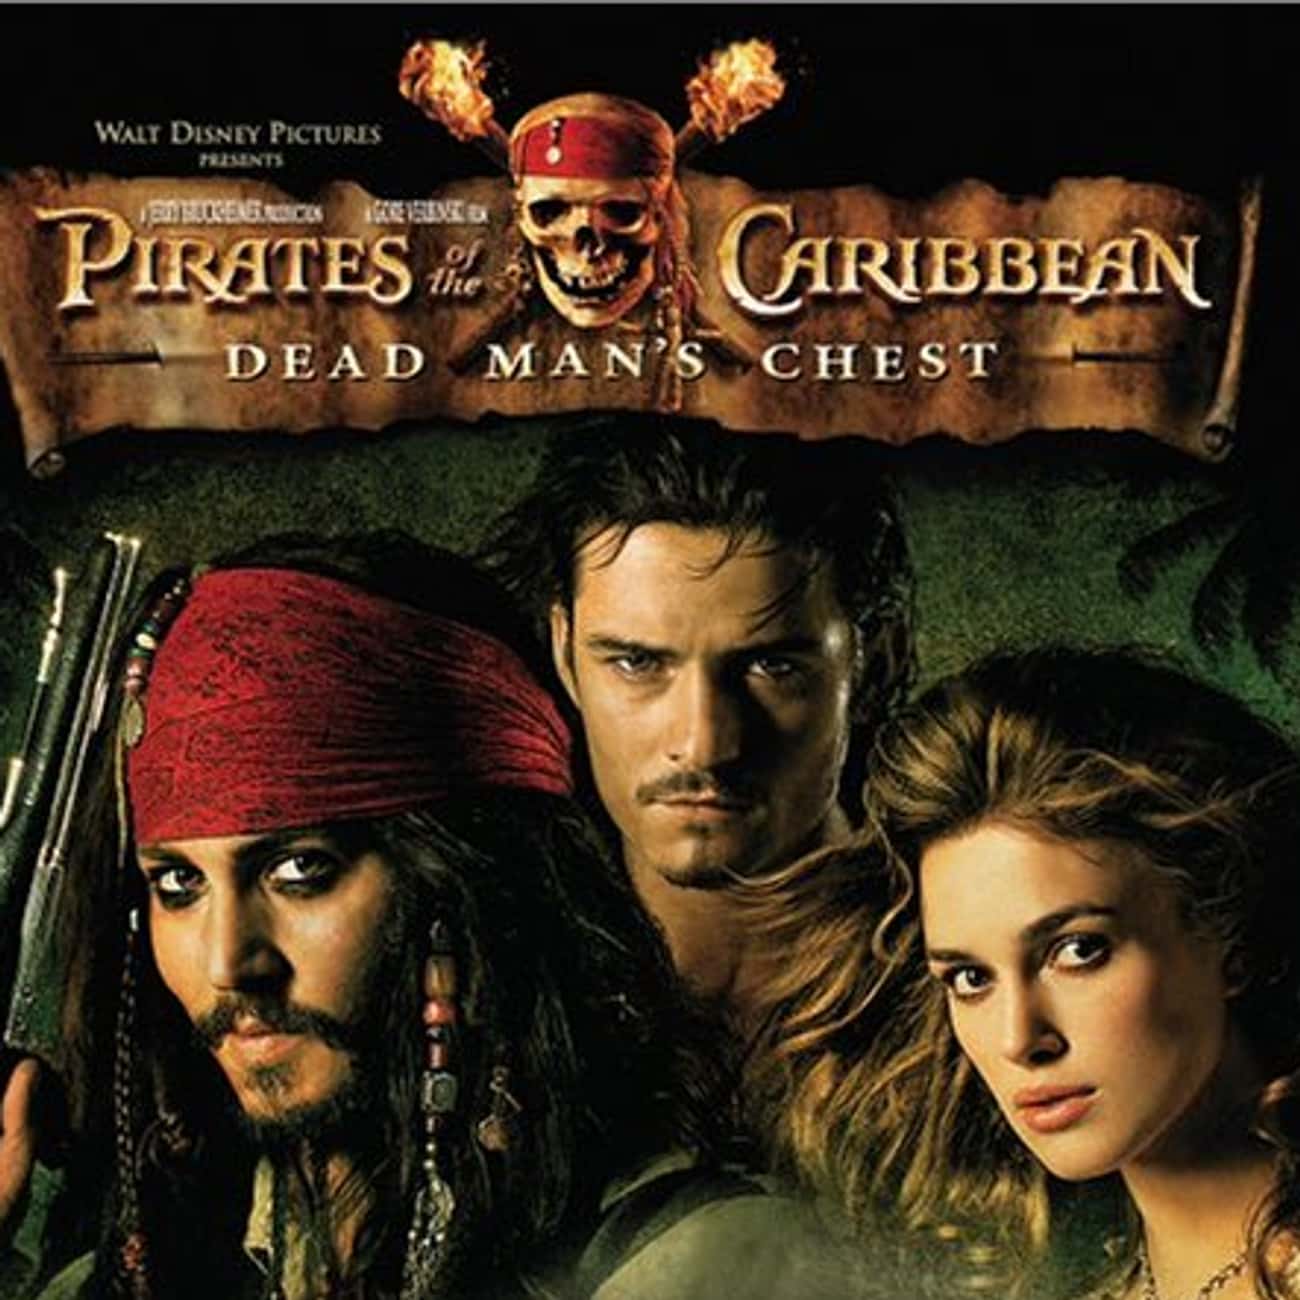 The Best 'Pirates of the Caribbean' Movies, Ranked by Fans